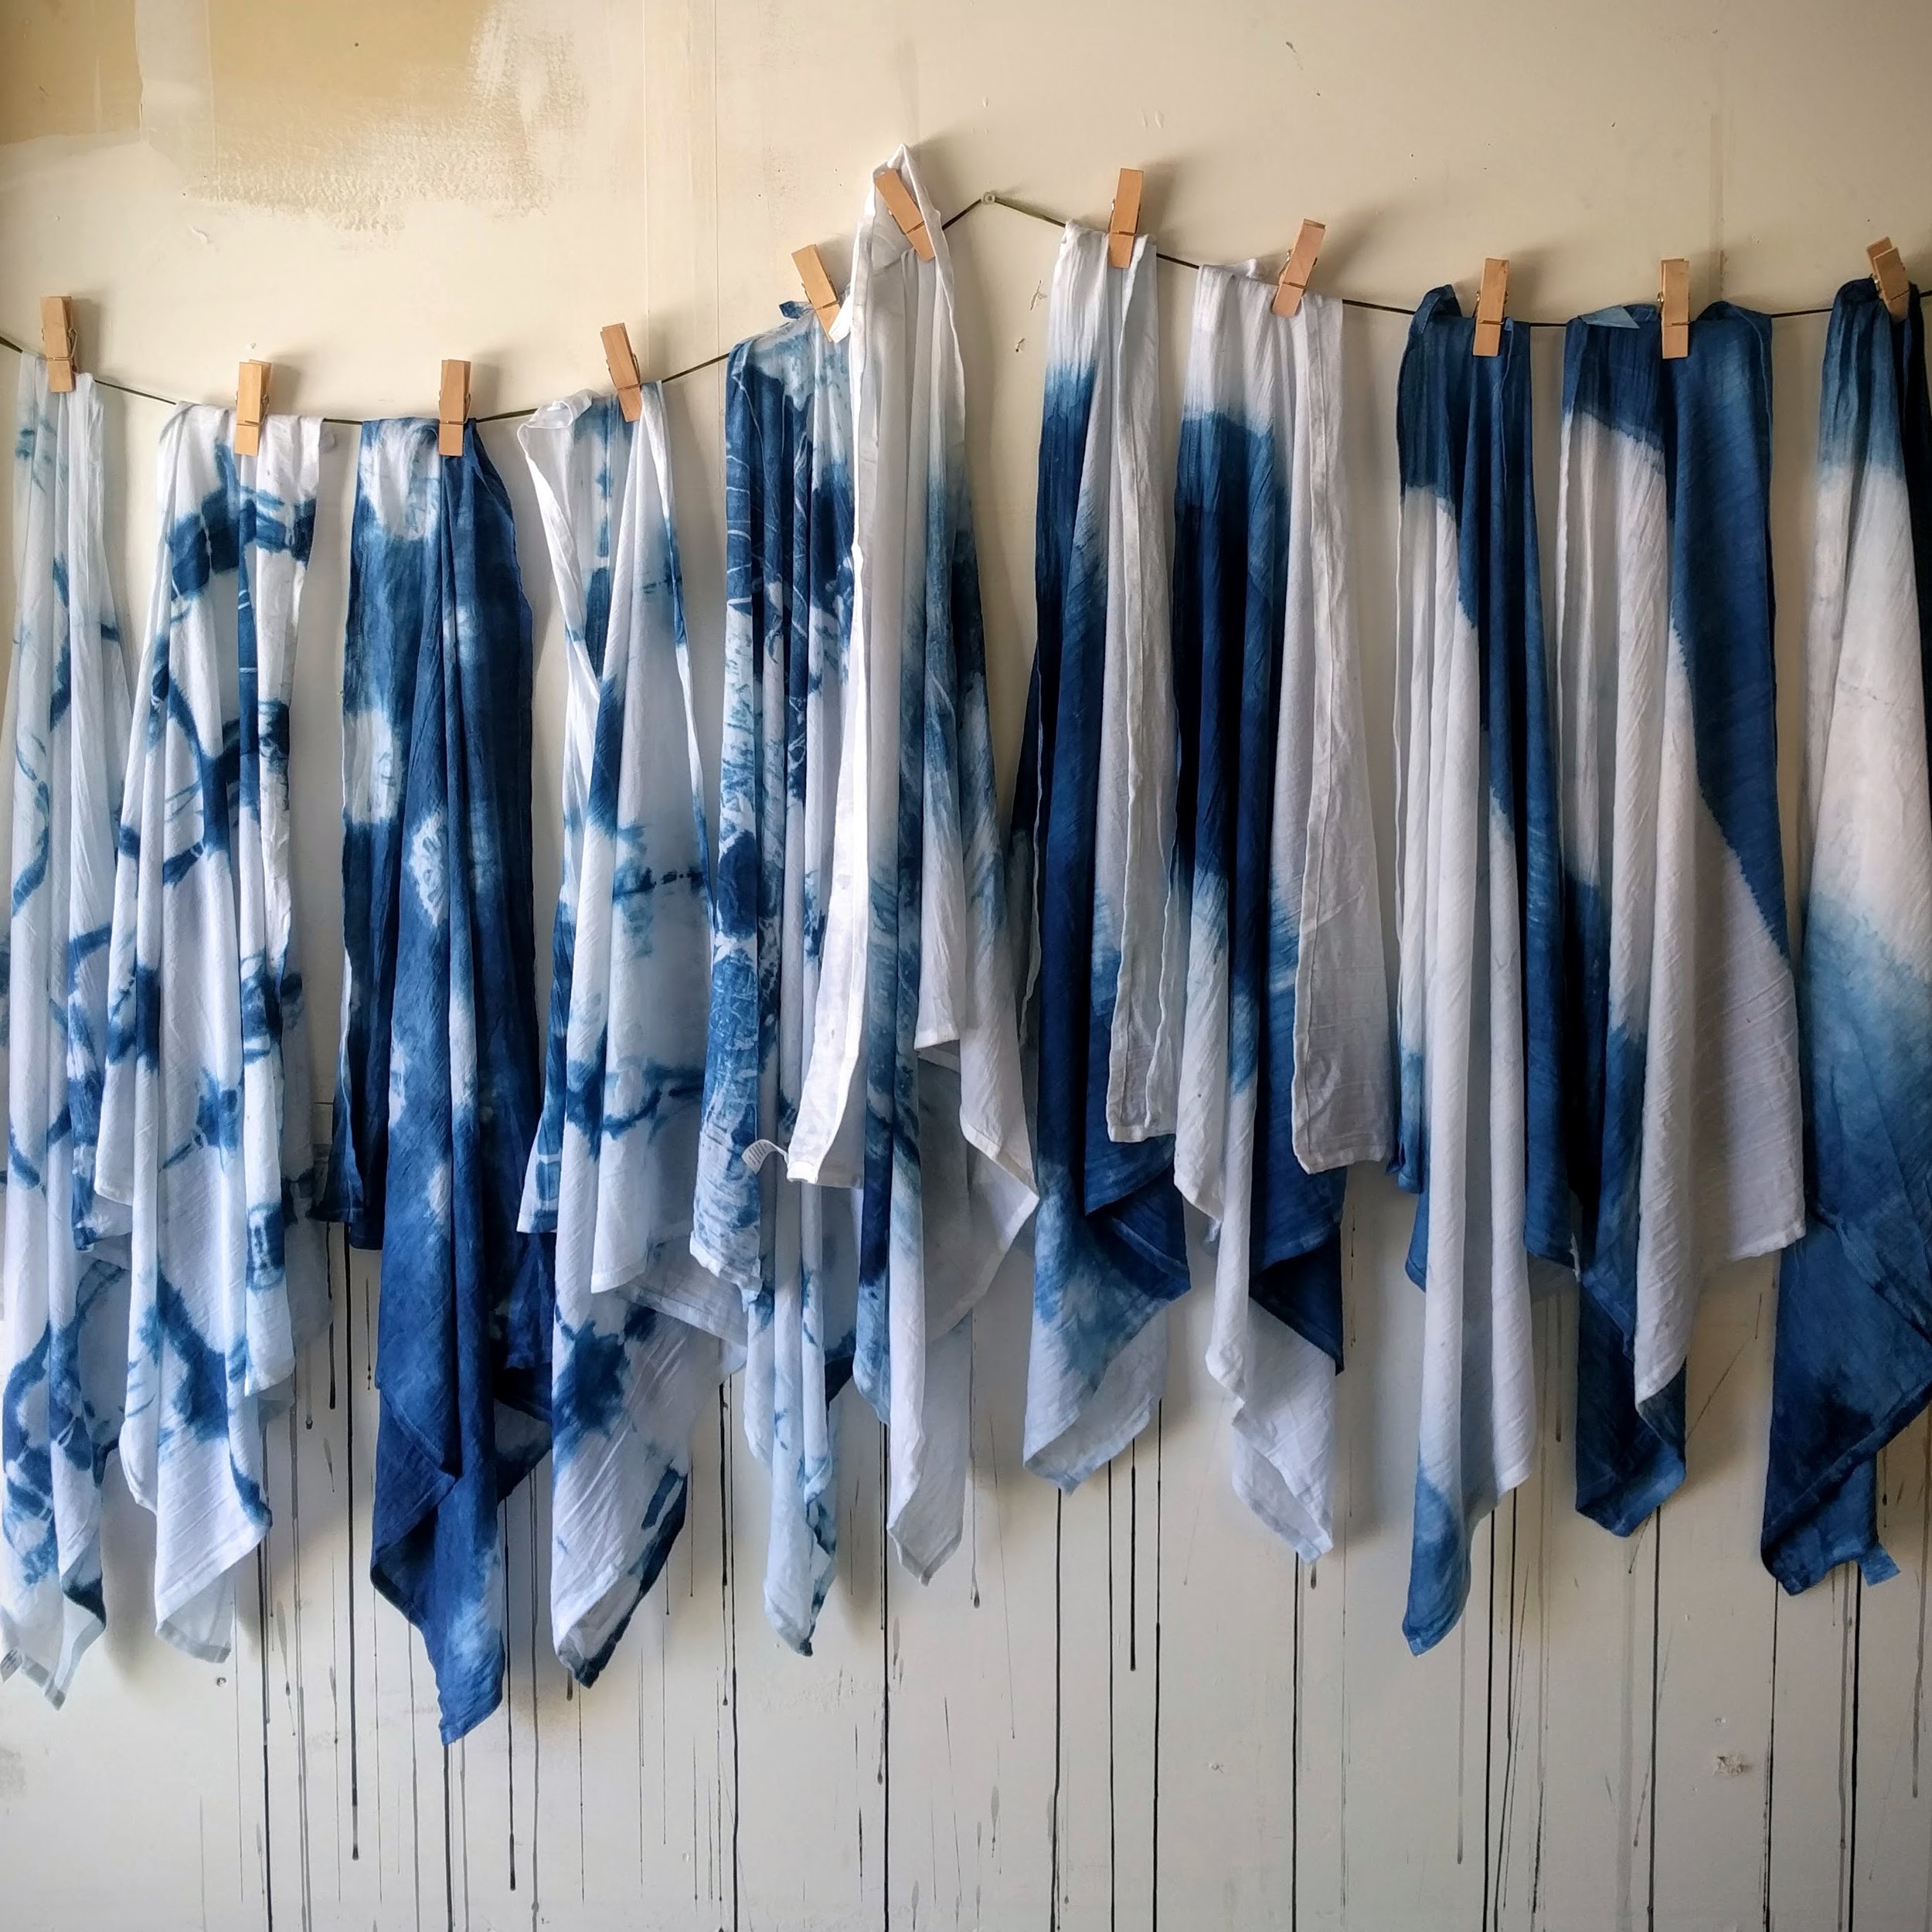  I also dyed some in more traditional shibori patterns. 